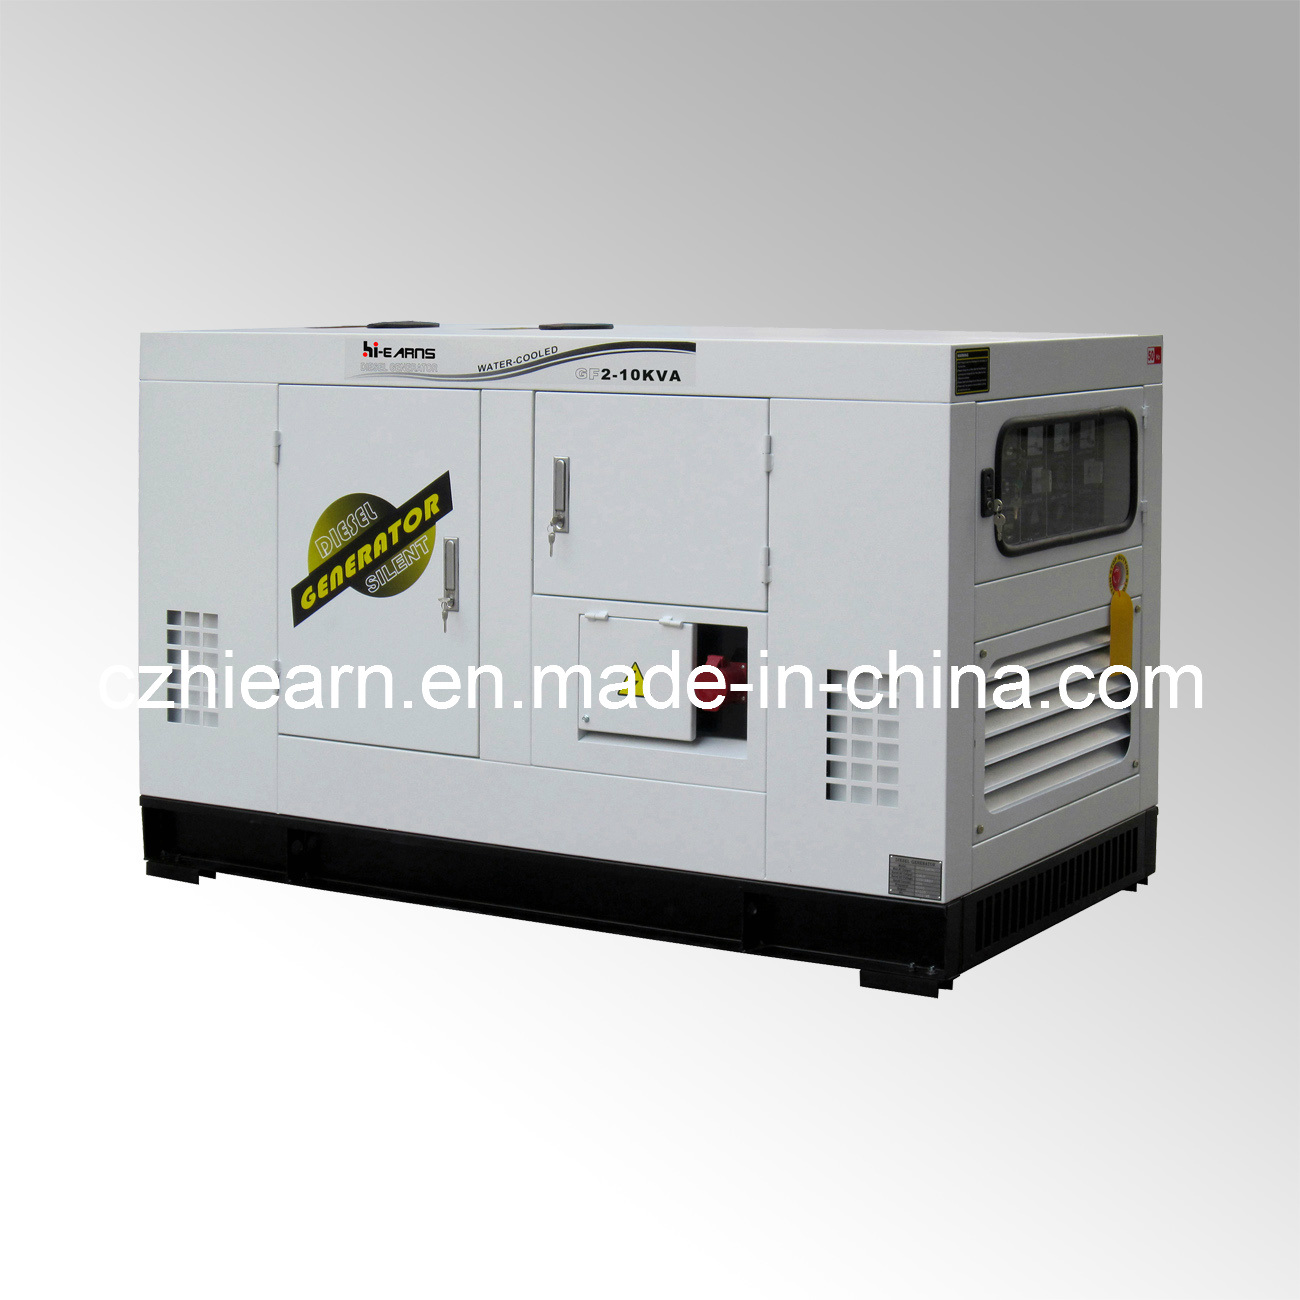 Water-Cooled Diesel Generator with Chinese Quanchai Engine (GF2-10kVA)